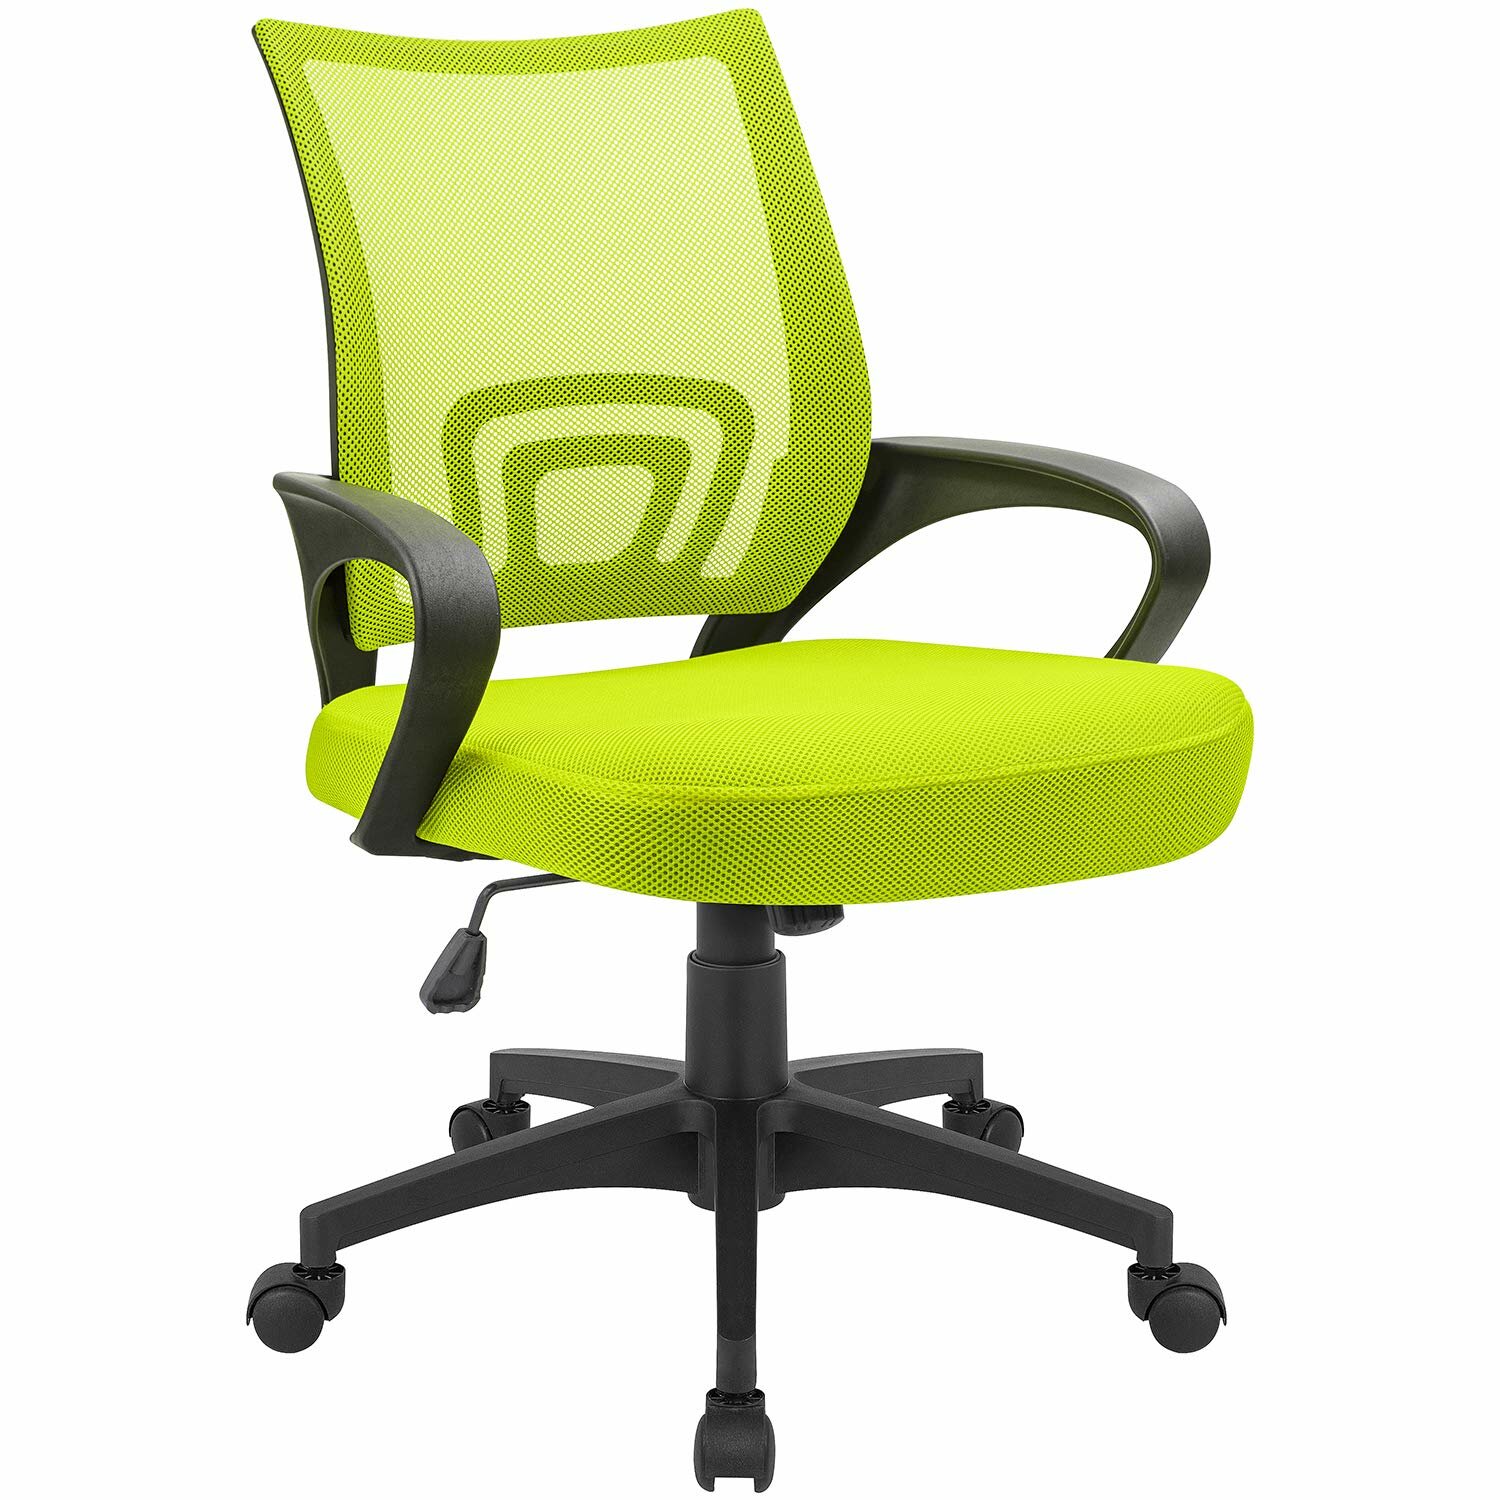 Wayfair | Green Office Chairs You'll Love in 2022